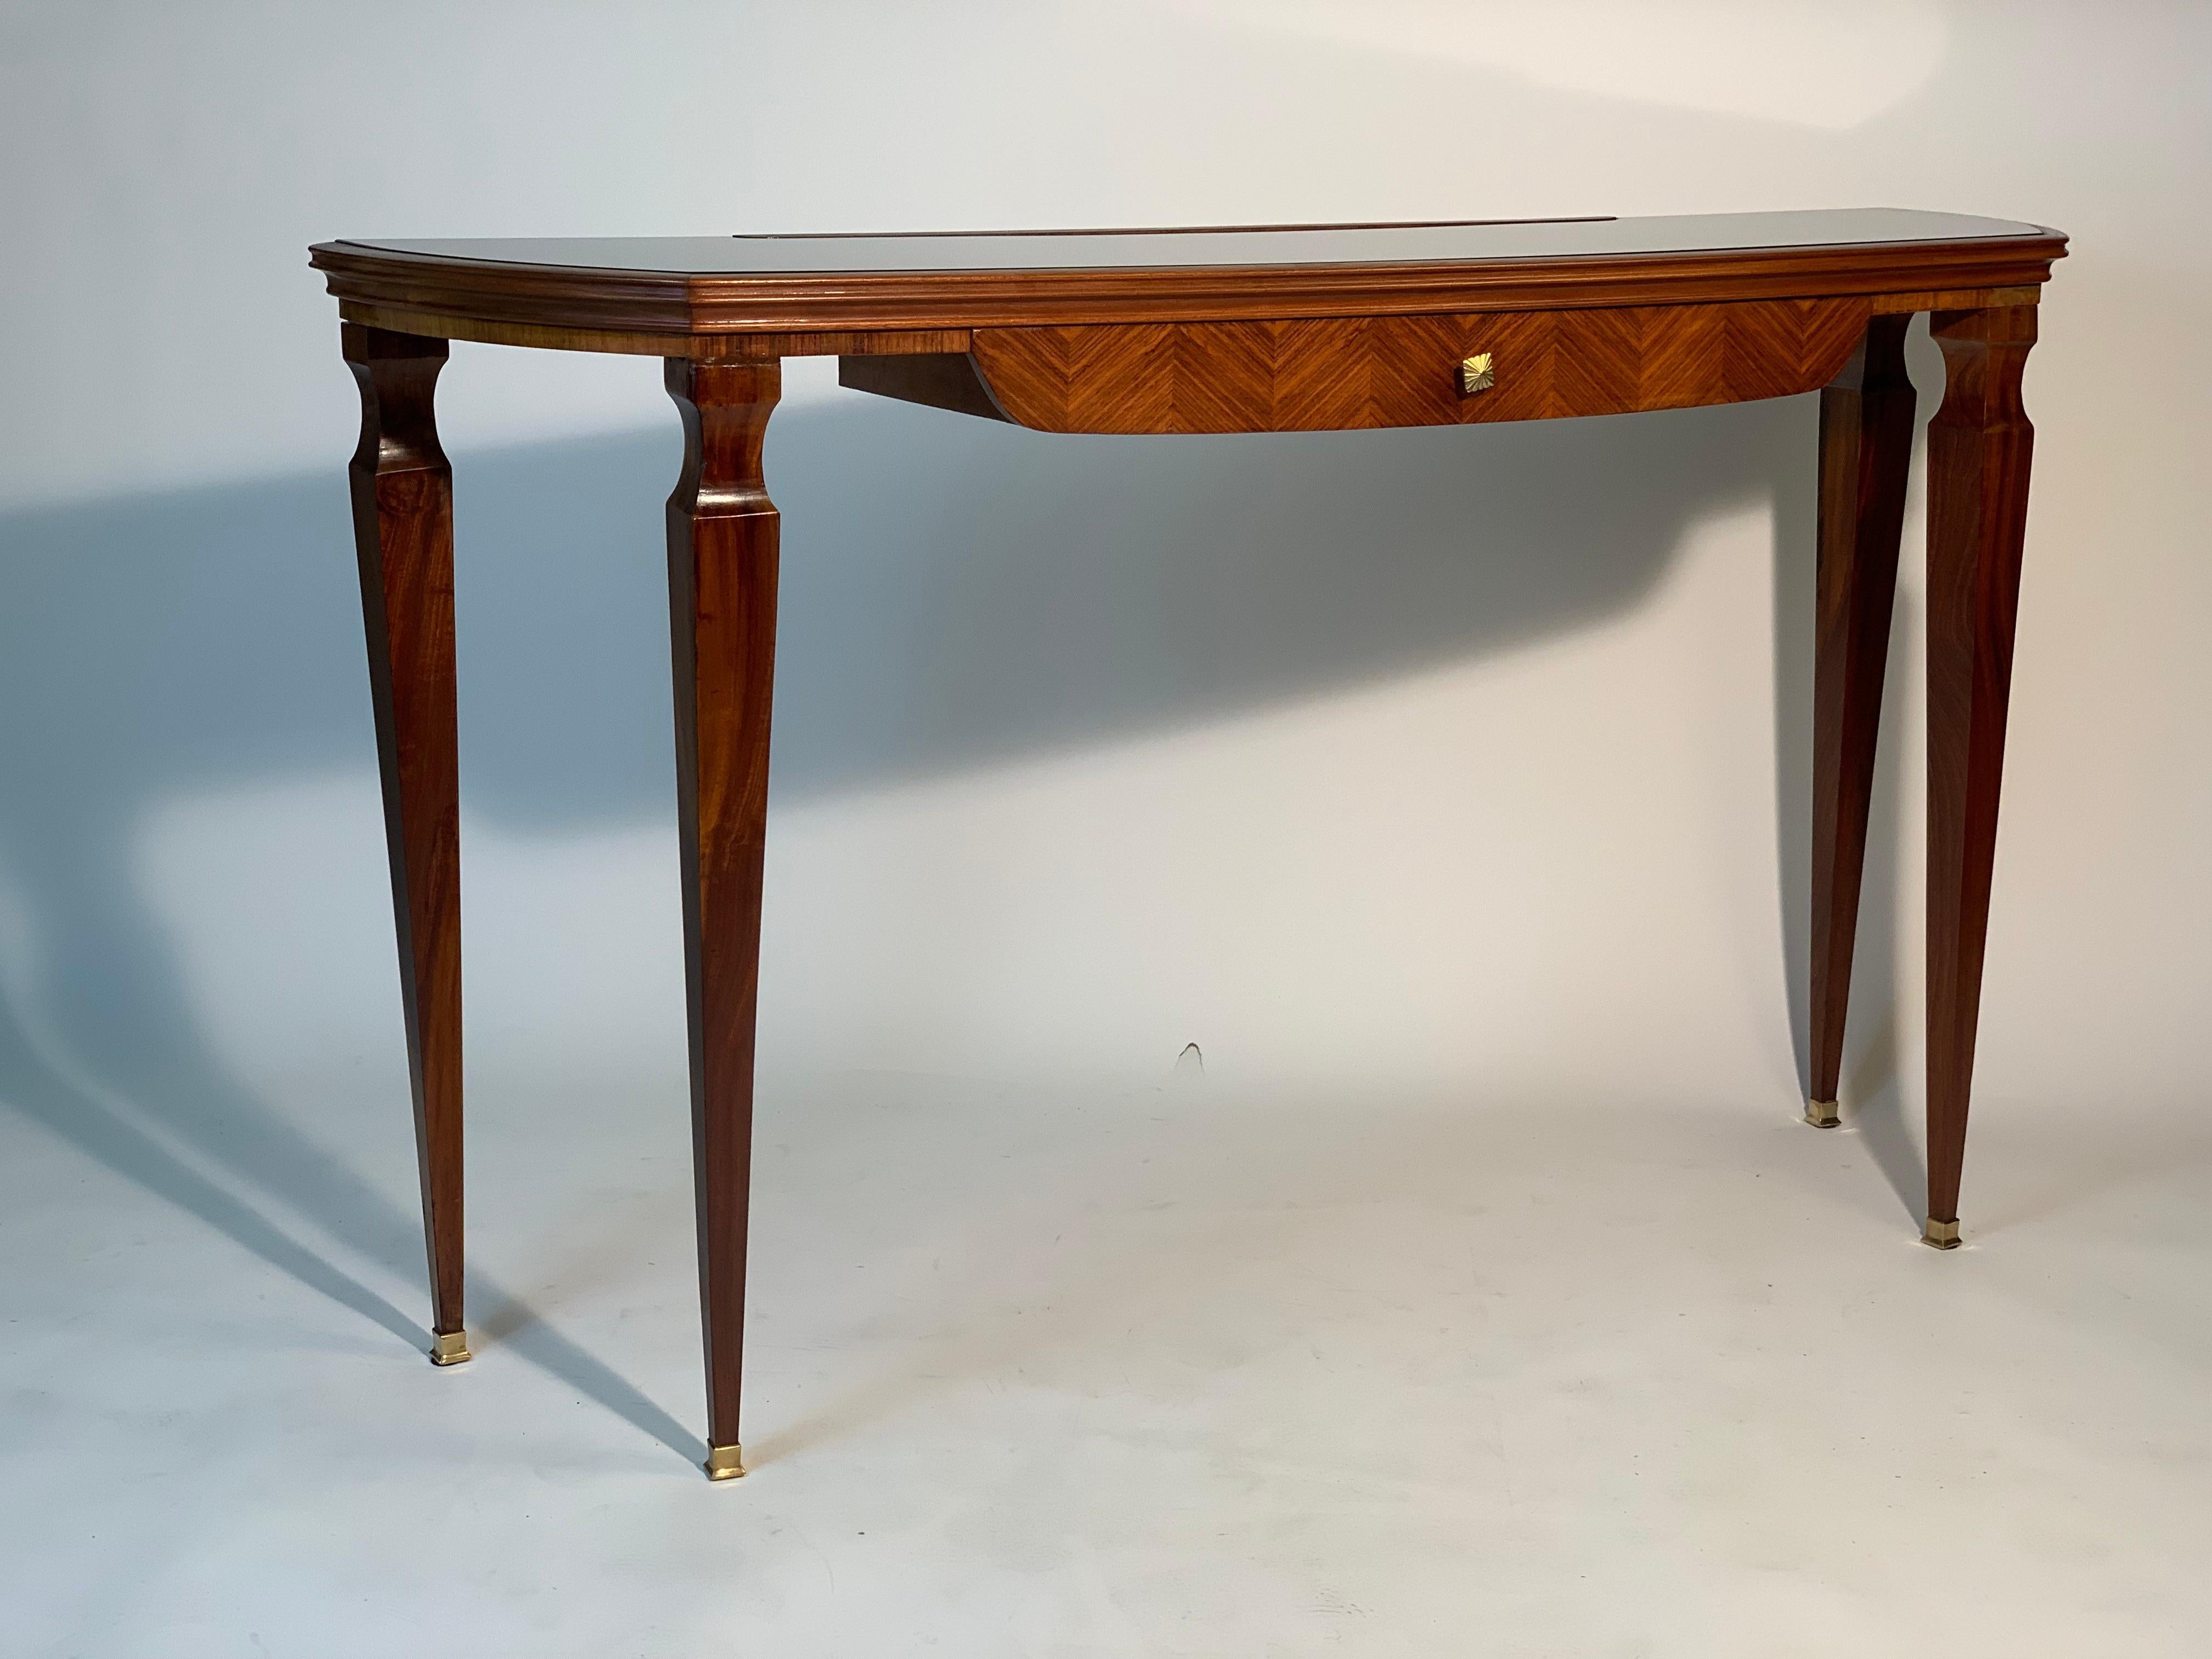 Mid-century Italian console with convex sides, black glass top, four truncated cone legs that tighten downwards and ending with four brass feet, a herringbone inlaid drawer with a precious and luxurious wood is embellished with a cast brass